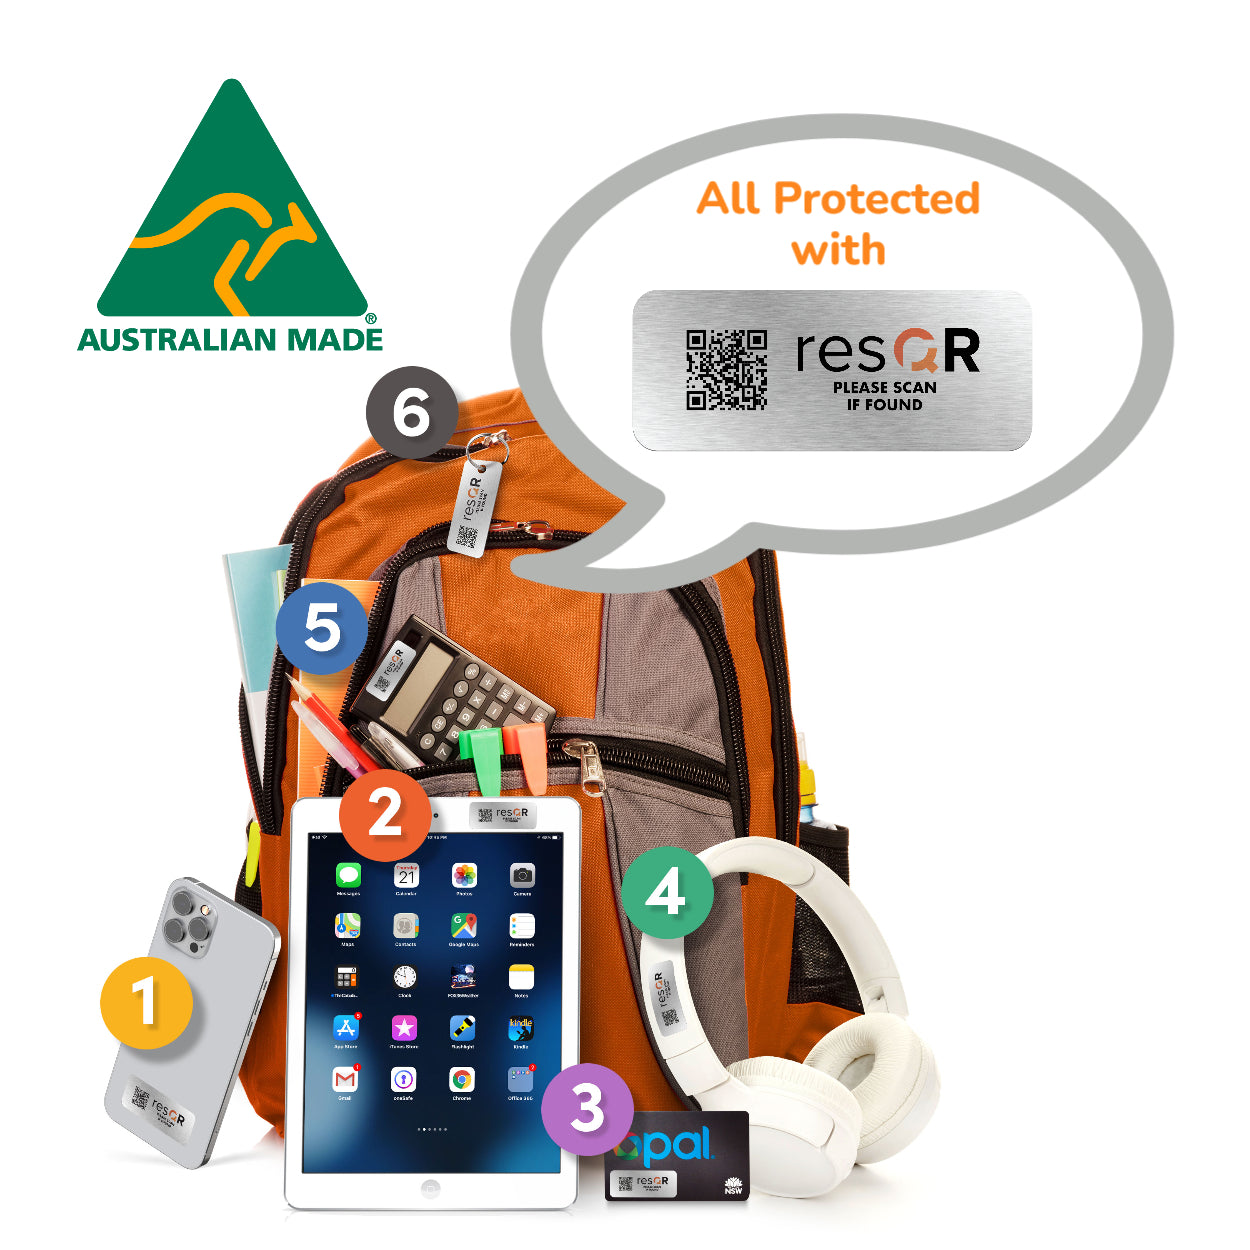 resQR Tag & Sticker Family Pack - Protect 30 Valuables